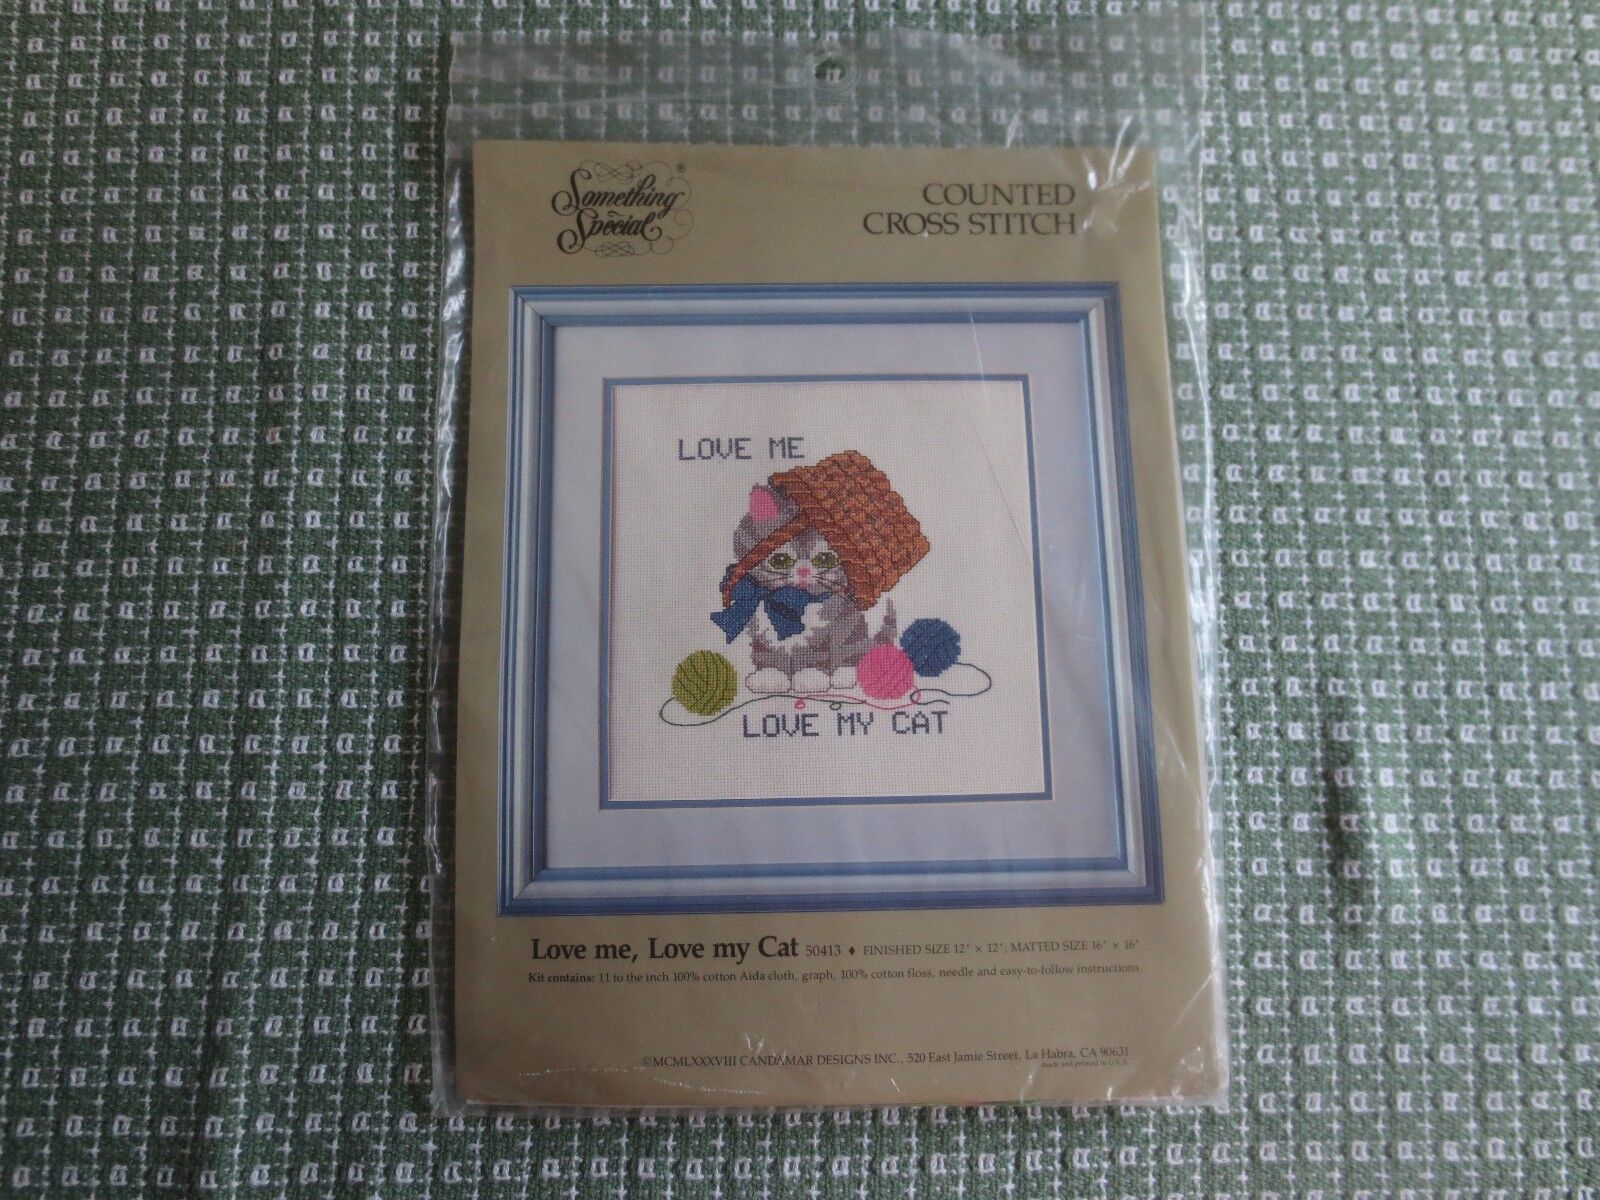  Candamar LOVE ME, LOVE MY CAT Counted CROSS STITCH Sealed KIT #50413-12" x 12"  - $9.00